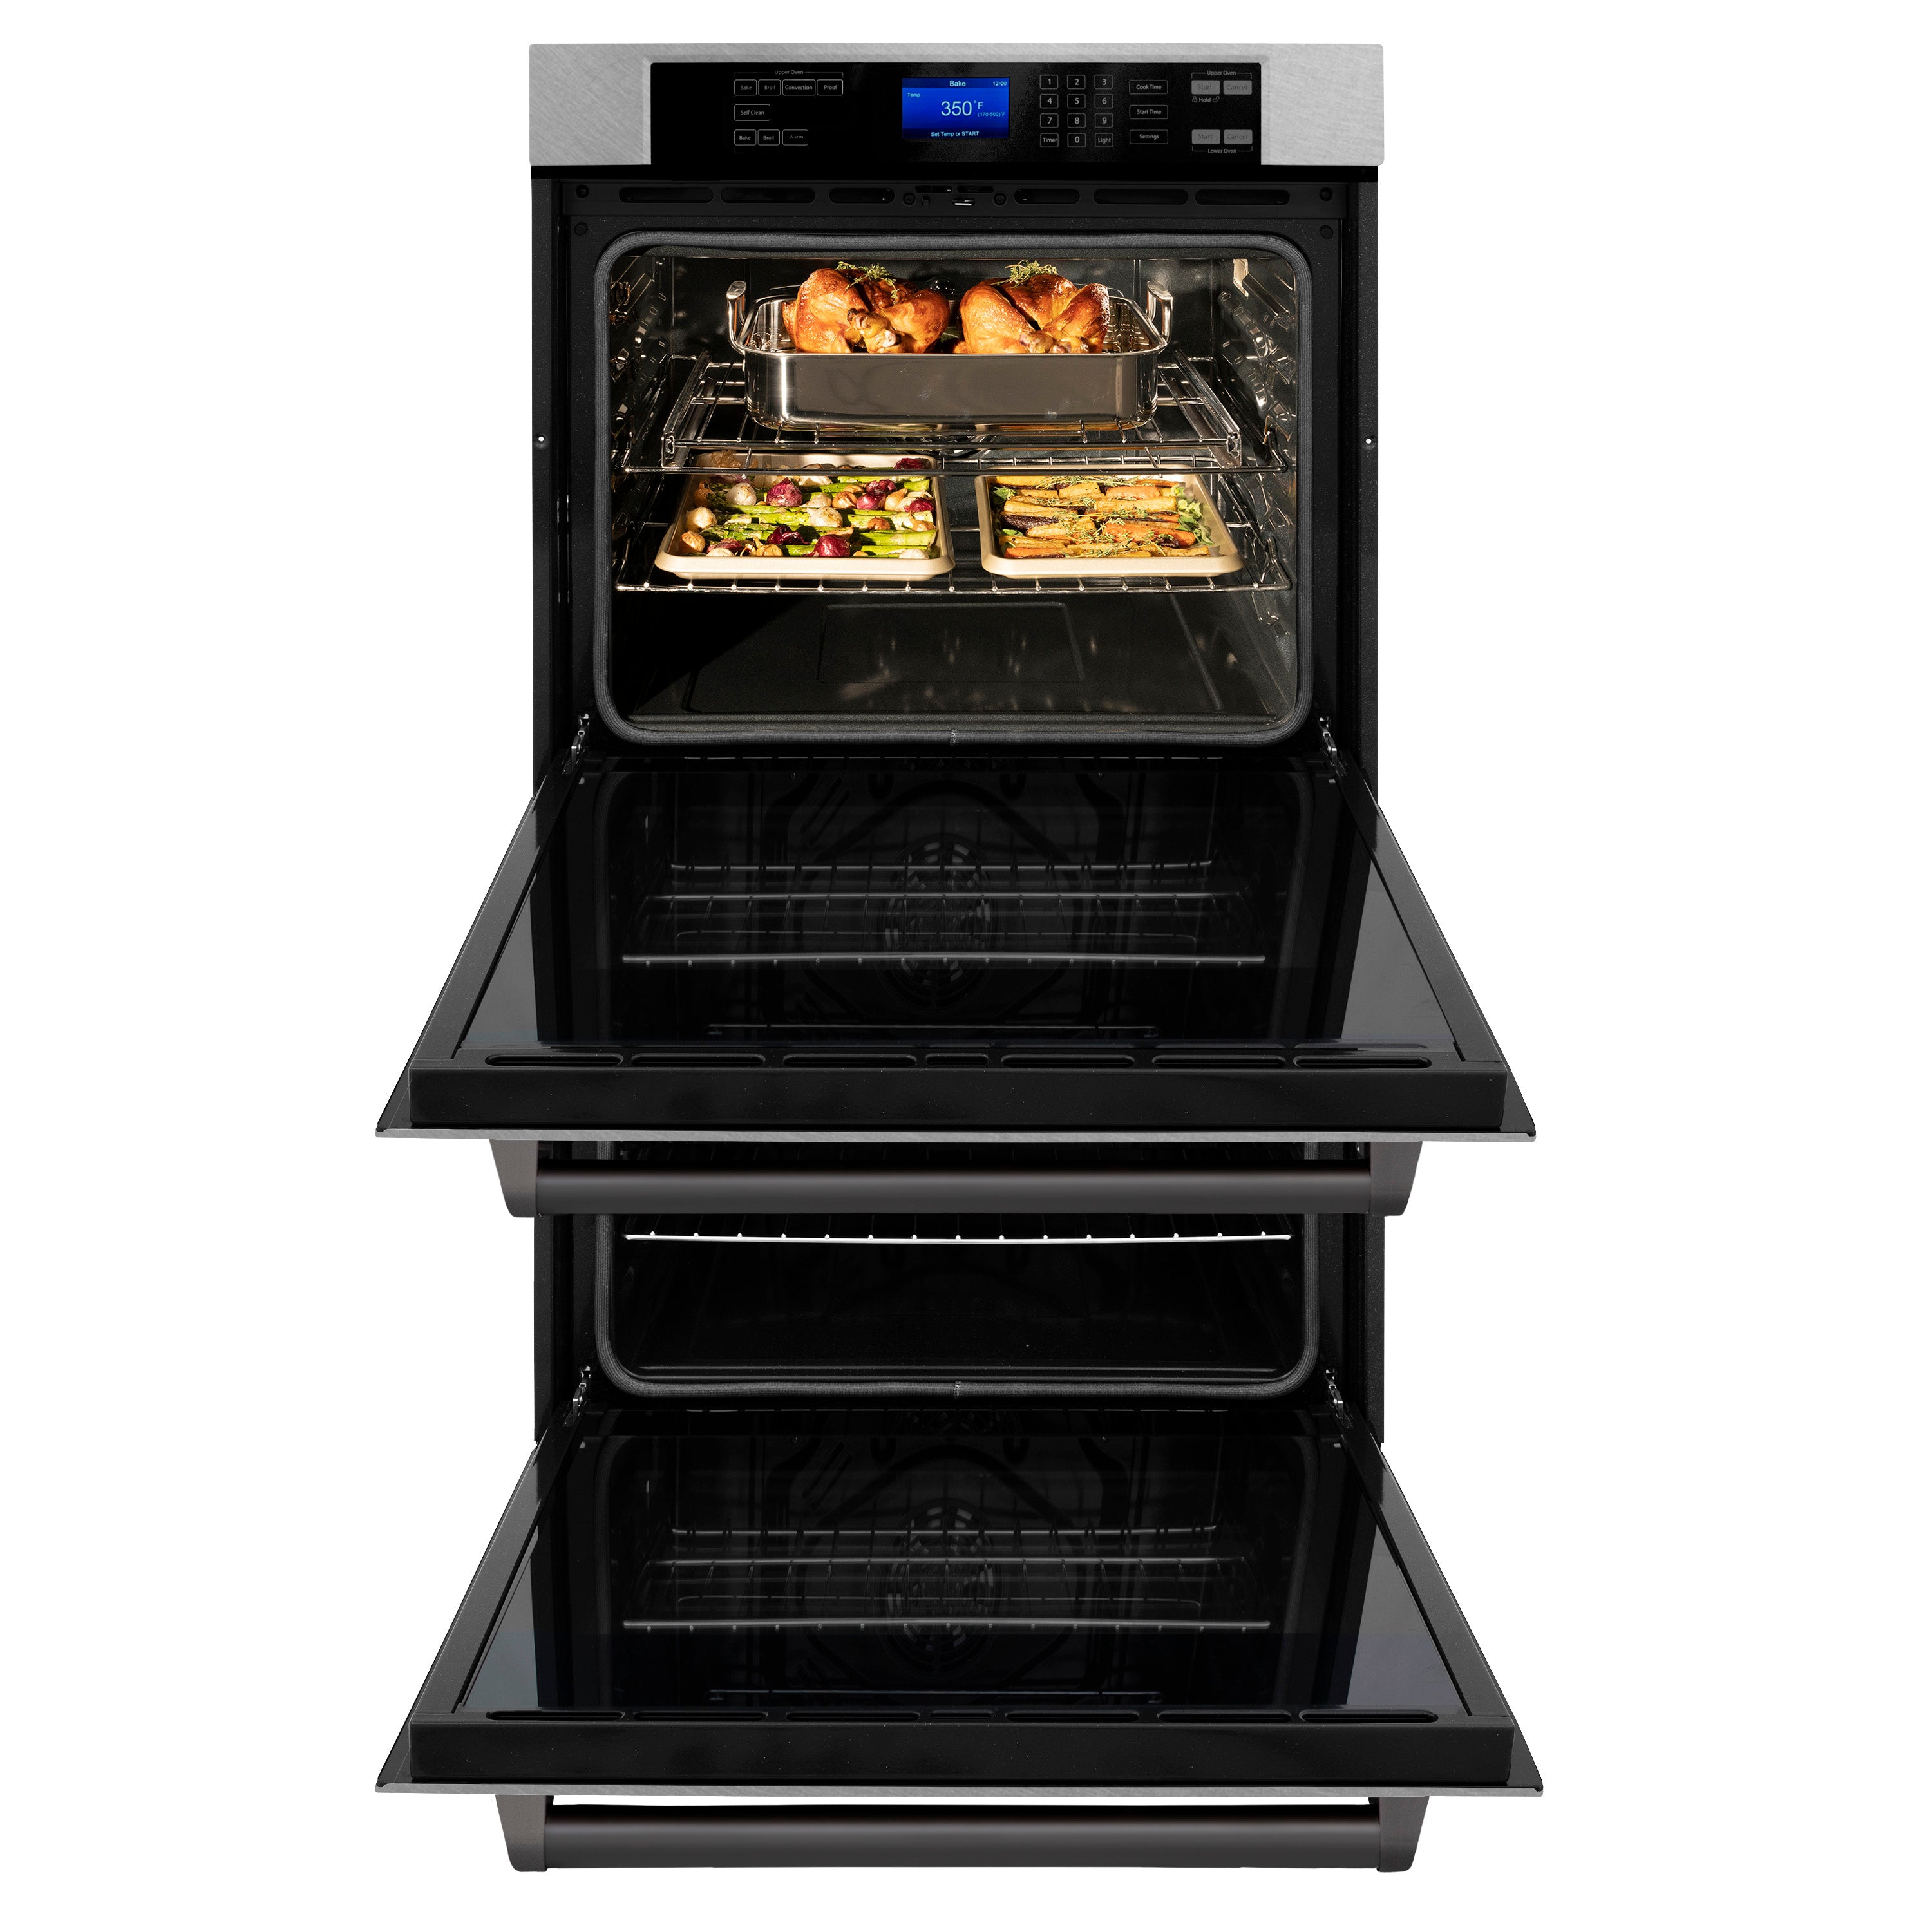 ZLINE 30" Autograph Edition Double Wall Oven with Self Clean and True Convection in Fingerprint Resistant Stainless Steel and Matte Black (AWDSZ-30-MB)